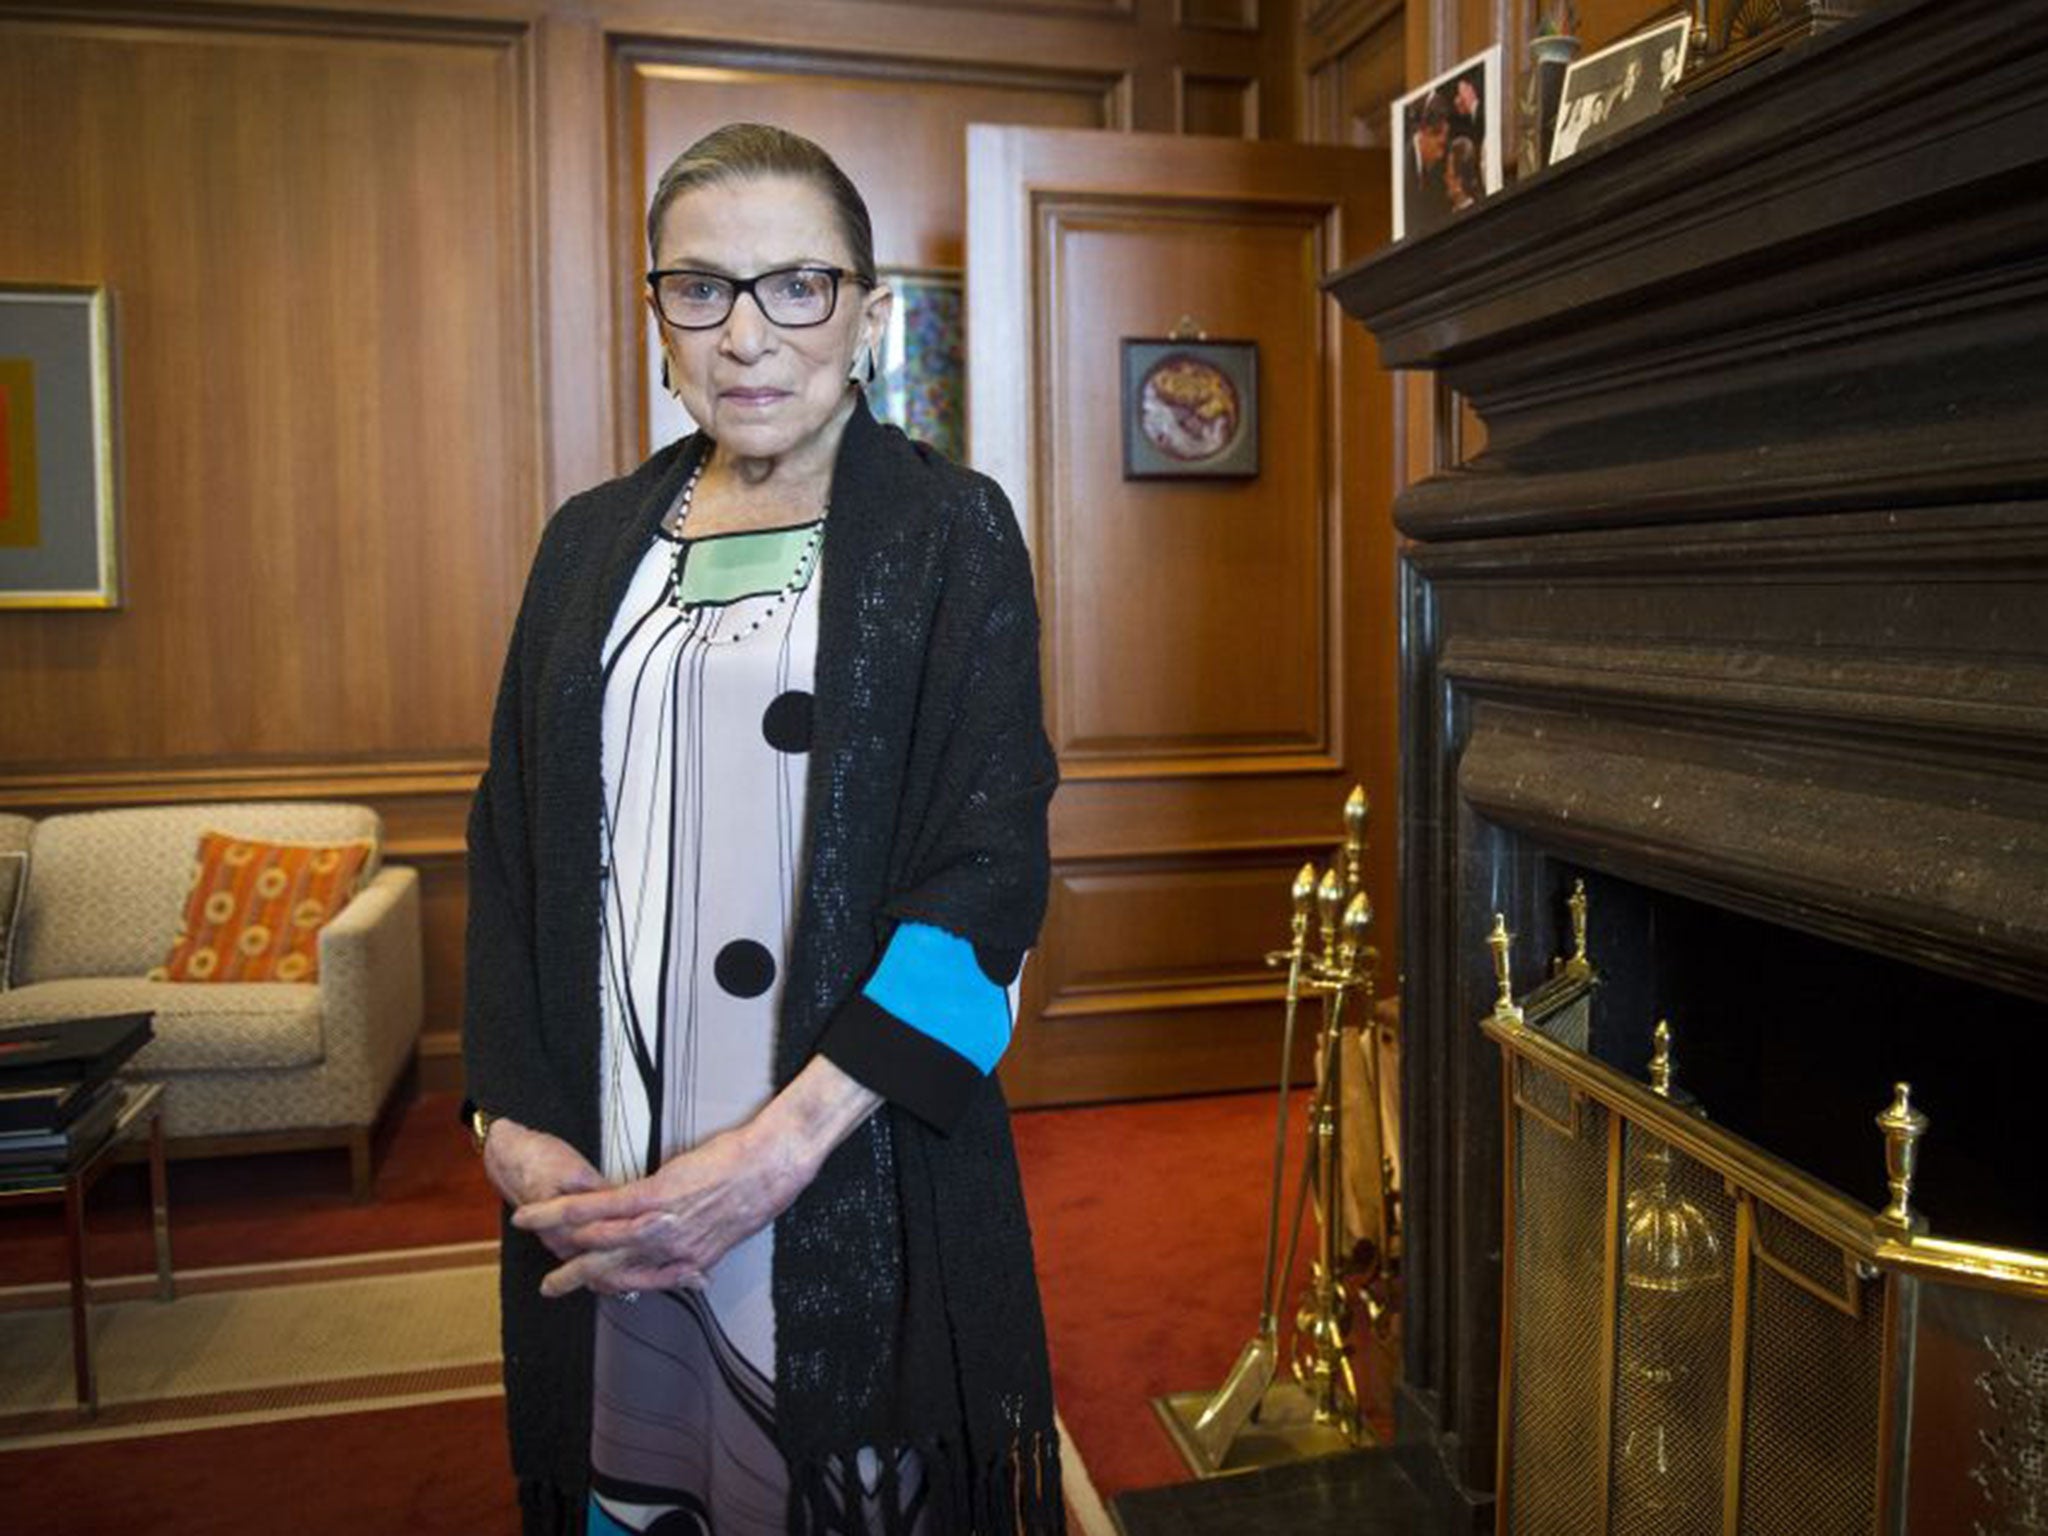 Justice Ruth Bader has made public the known, but unspoken, link between presidents and Supreme Court judges